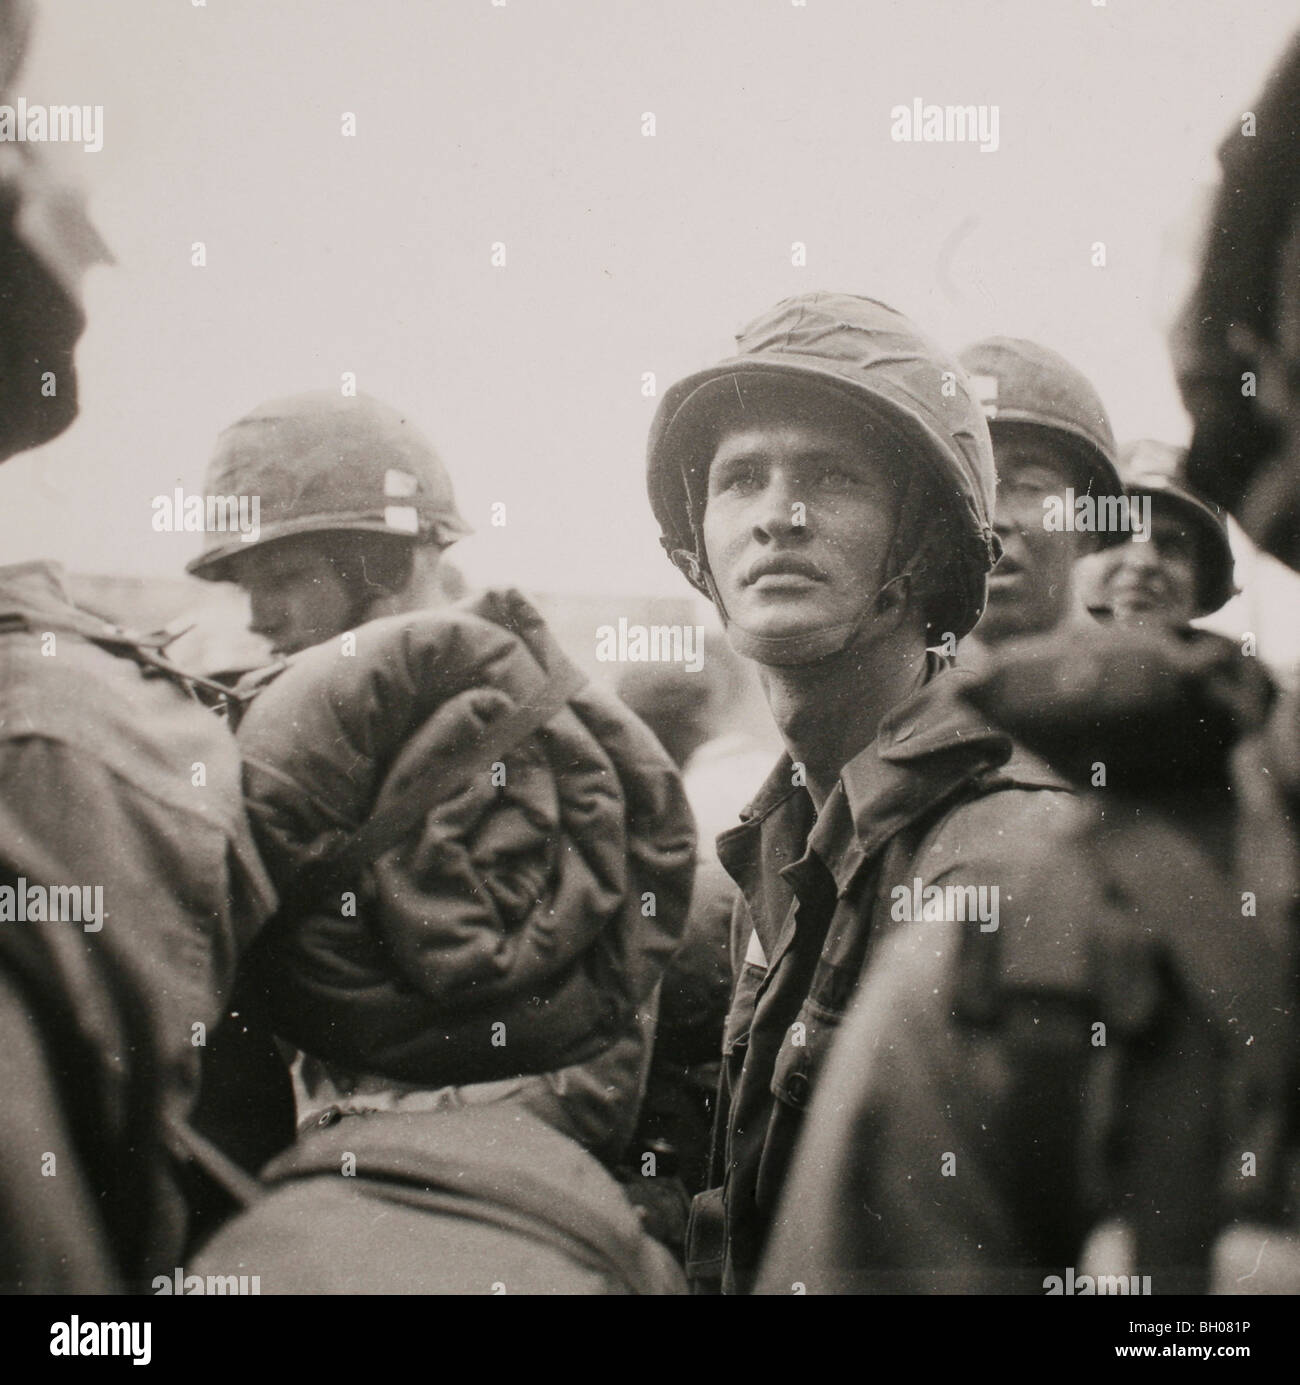 Arrival of the U.S. 1st Cavalry Division (Airmobile) in Vietnam in 1965. Stock Photo